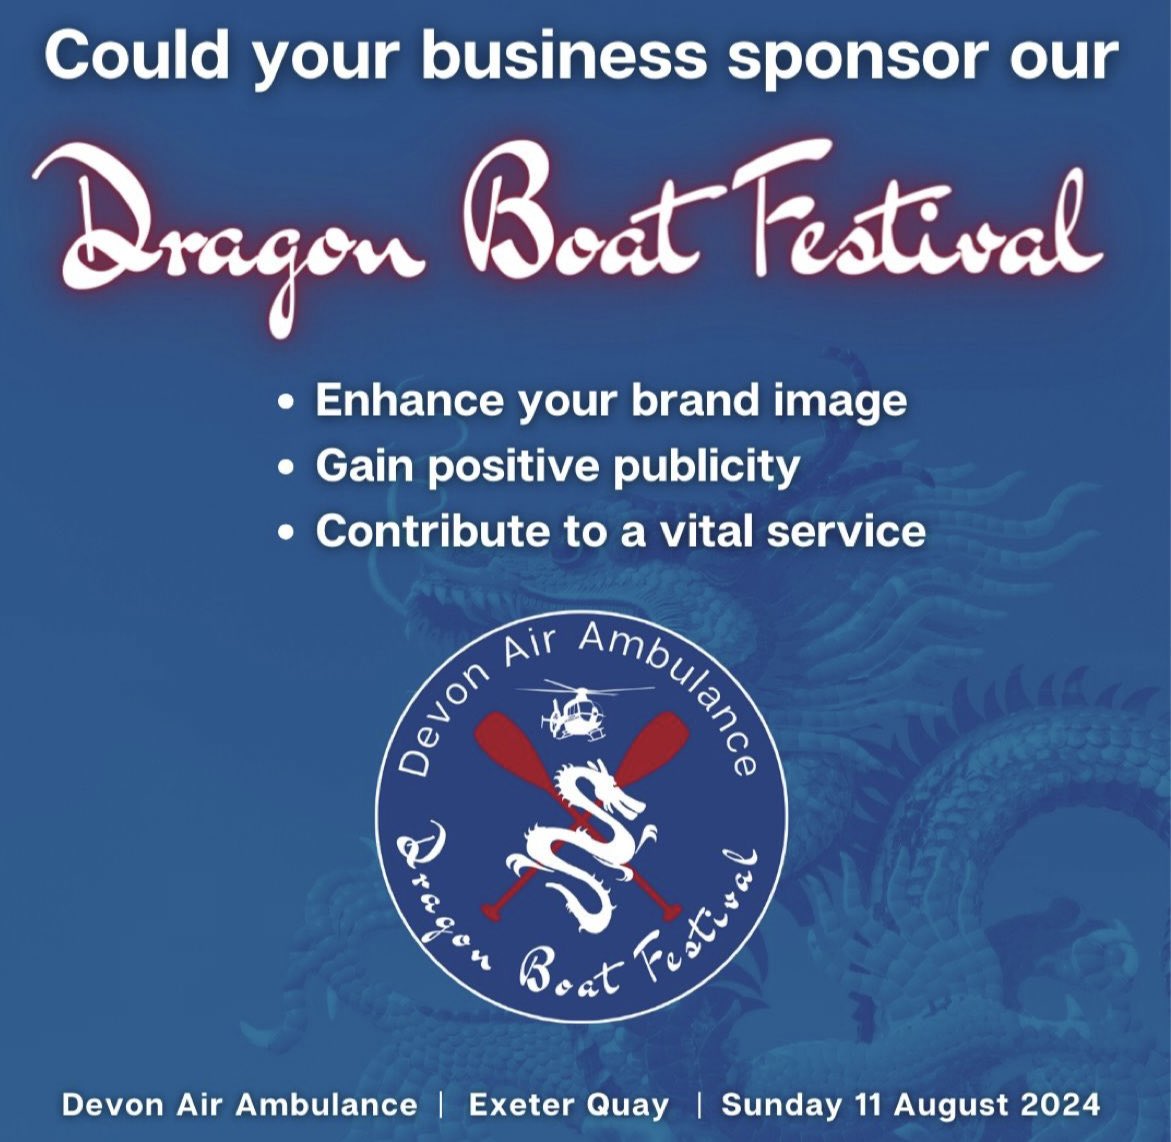 Could your business sponsor our 2024 Dragon Boat Festival? This event provides an opportunity for businesses and community groups to showcase their teamwork and competitive spirit! To find out how you can support us, download our sponsor pack here: daat.org/Handlers/Downl…